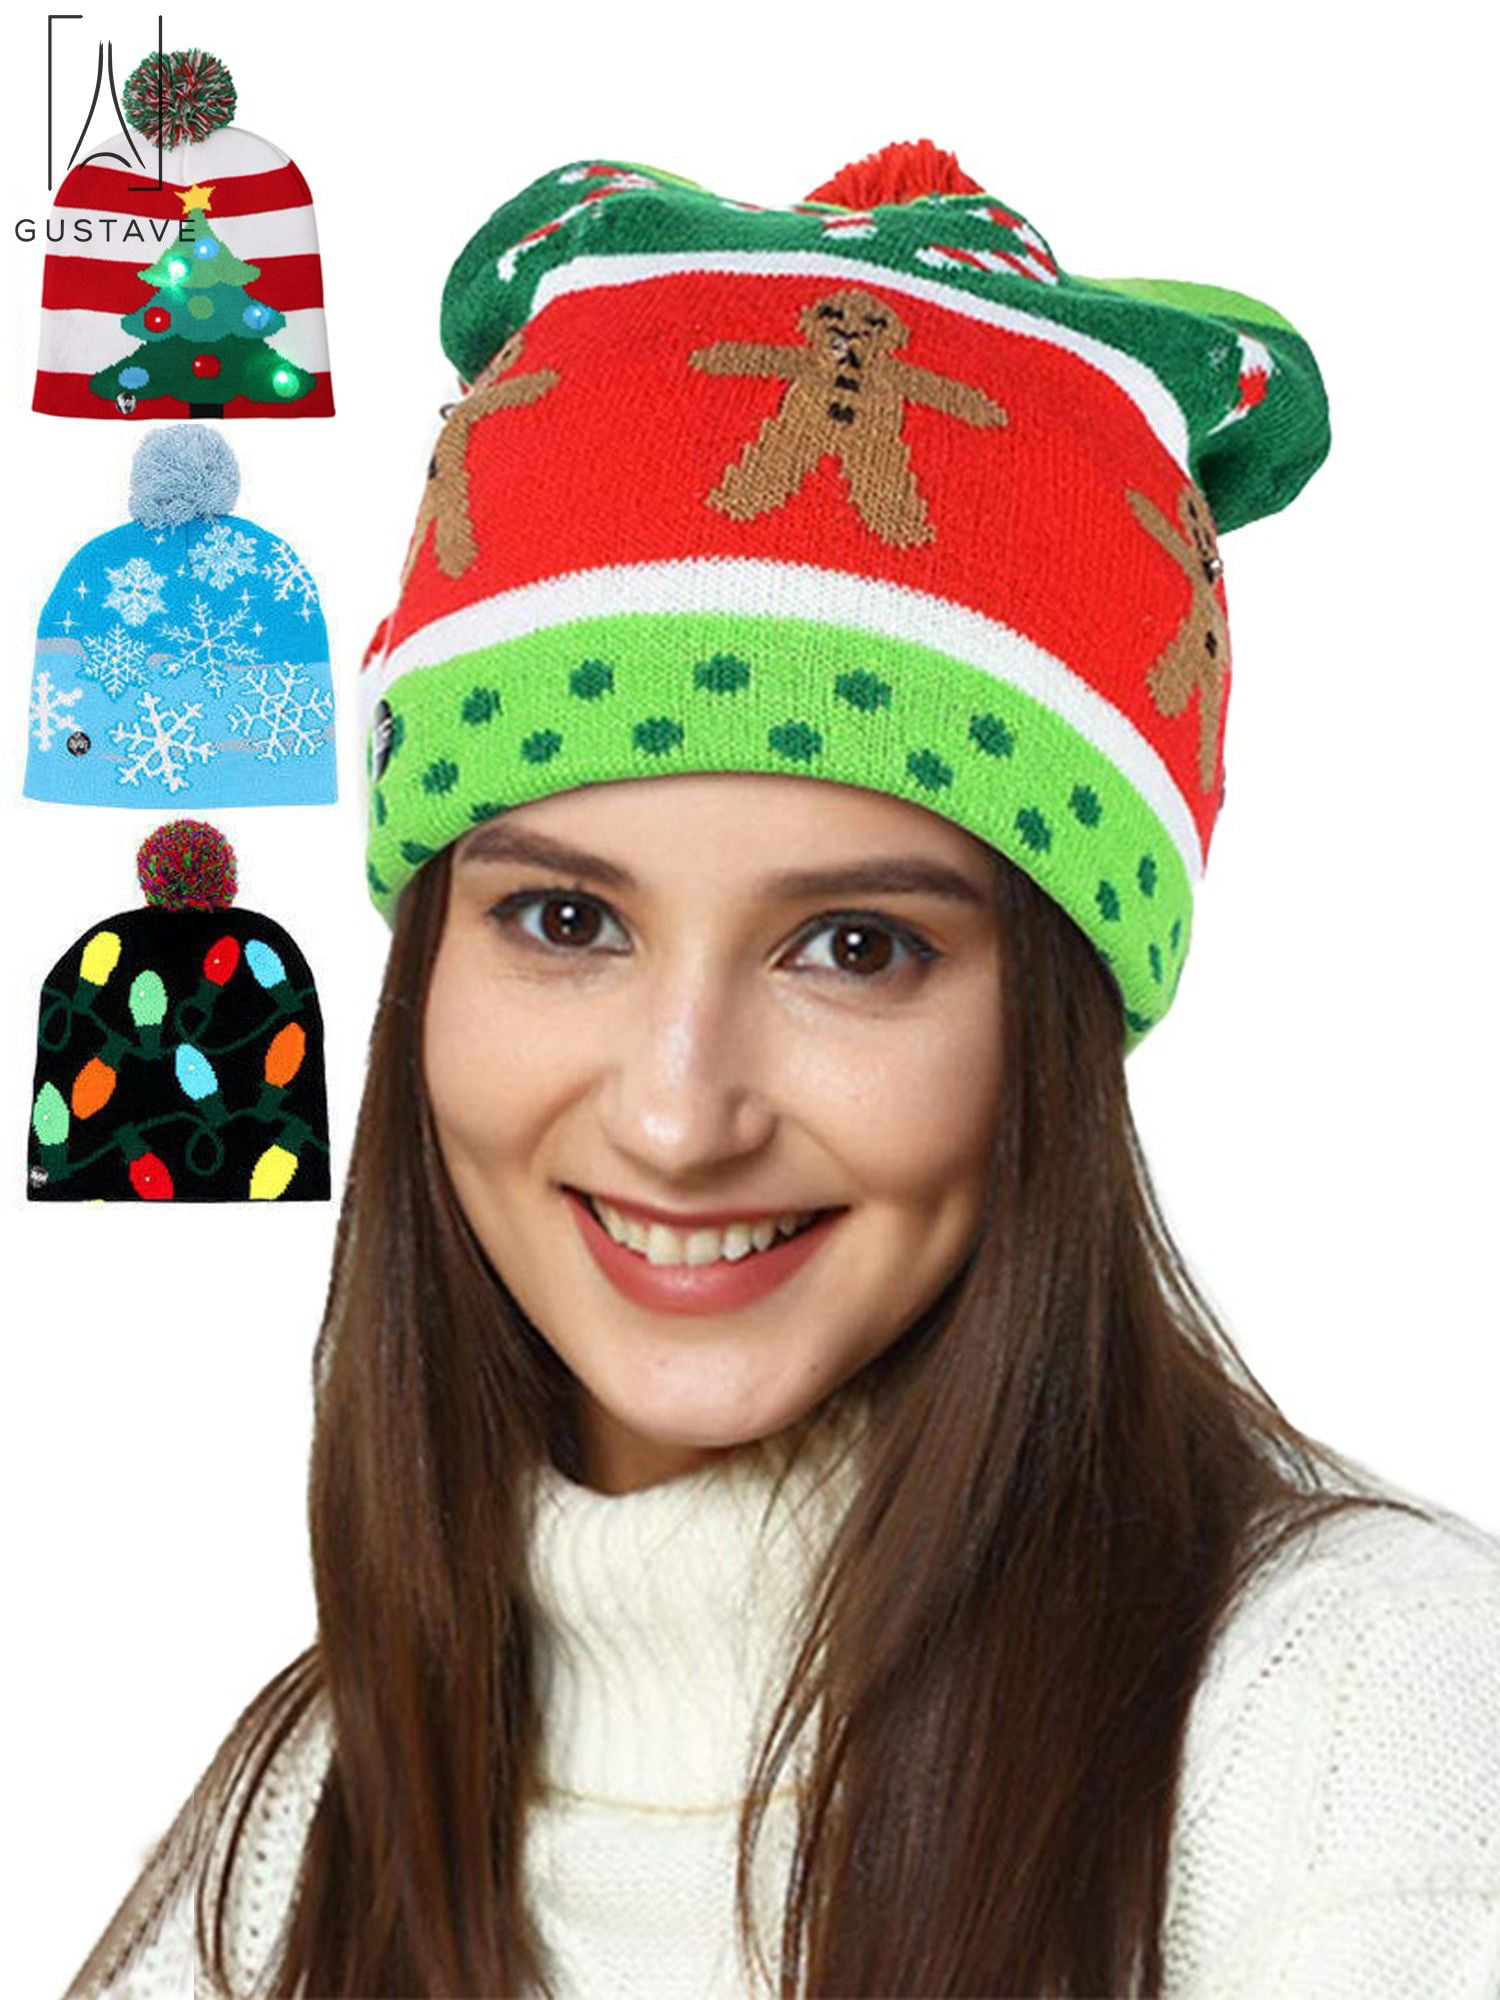 Mchochy Unisex 6 Colorful LED Light-up Ugly Sweater Christmas Hat Knitted Xmas Party Beanies Cap